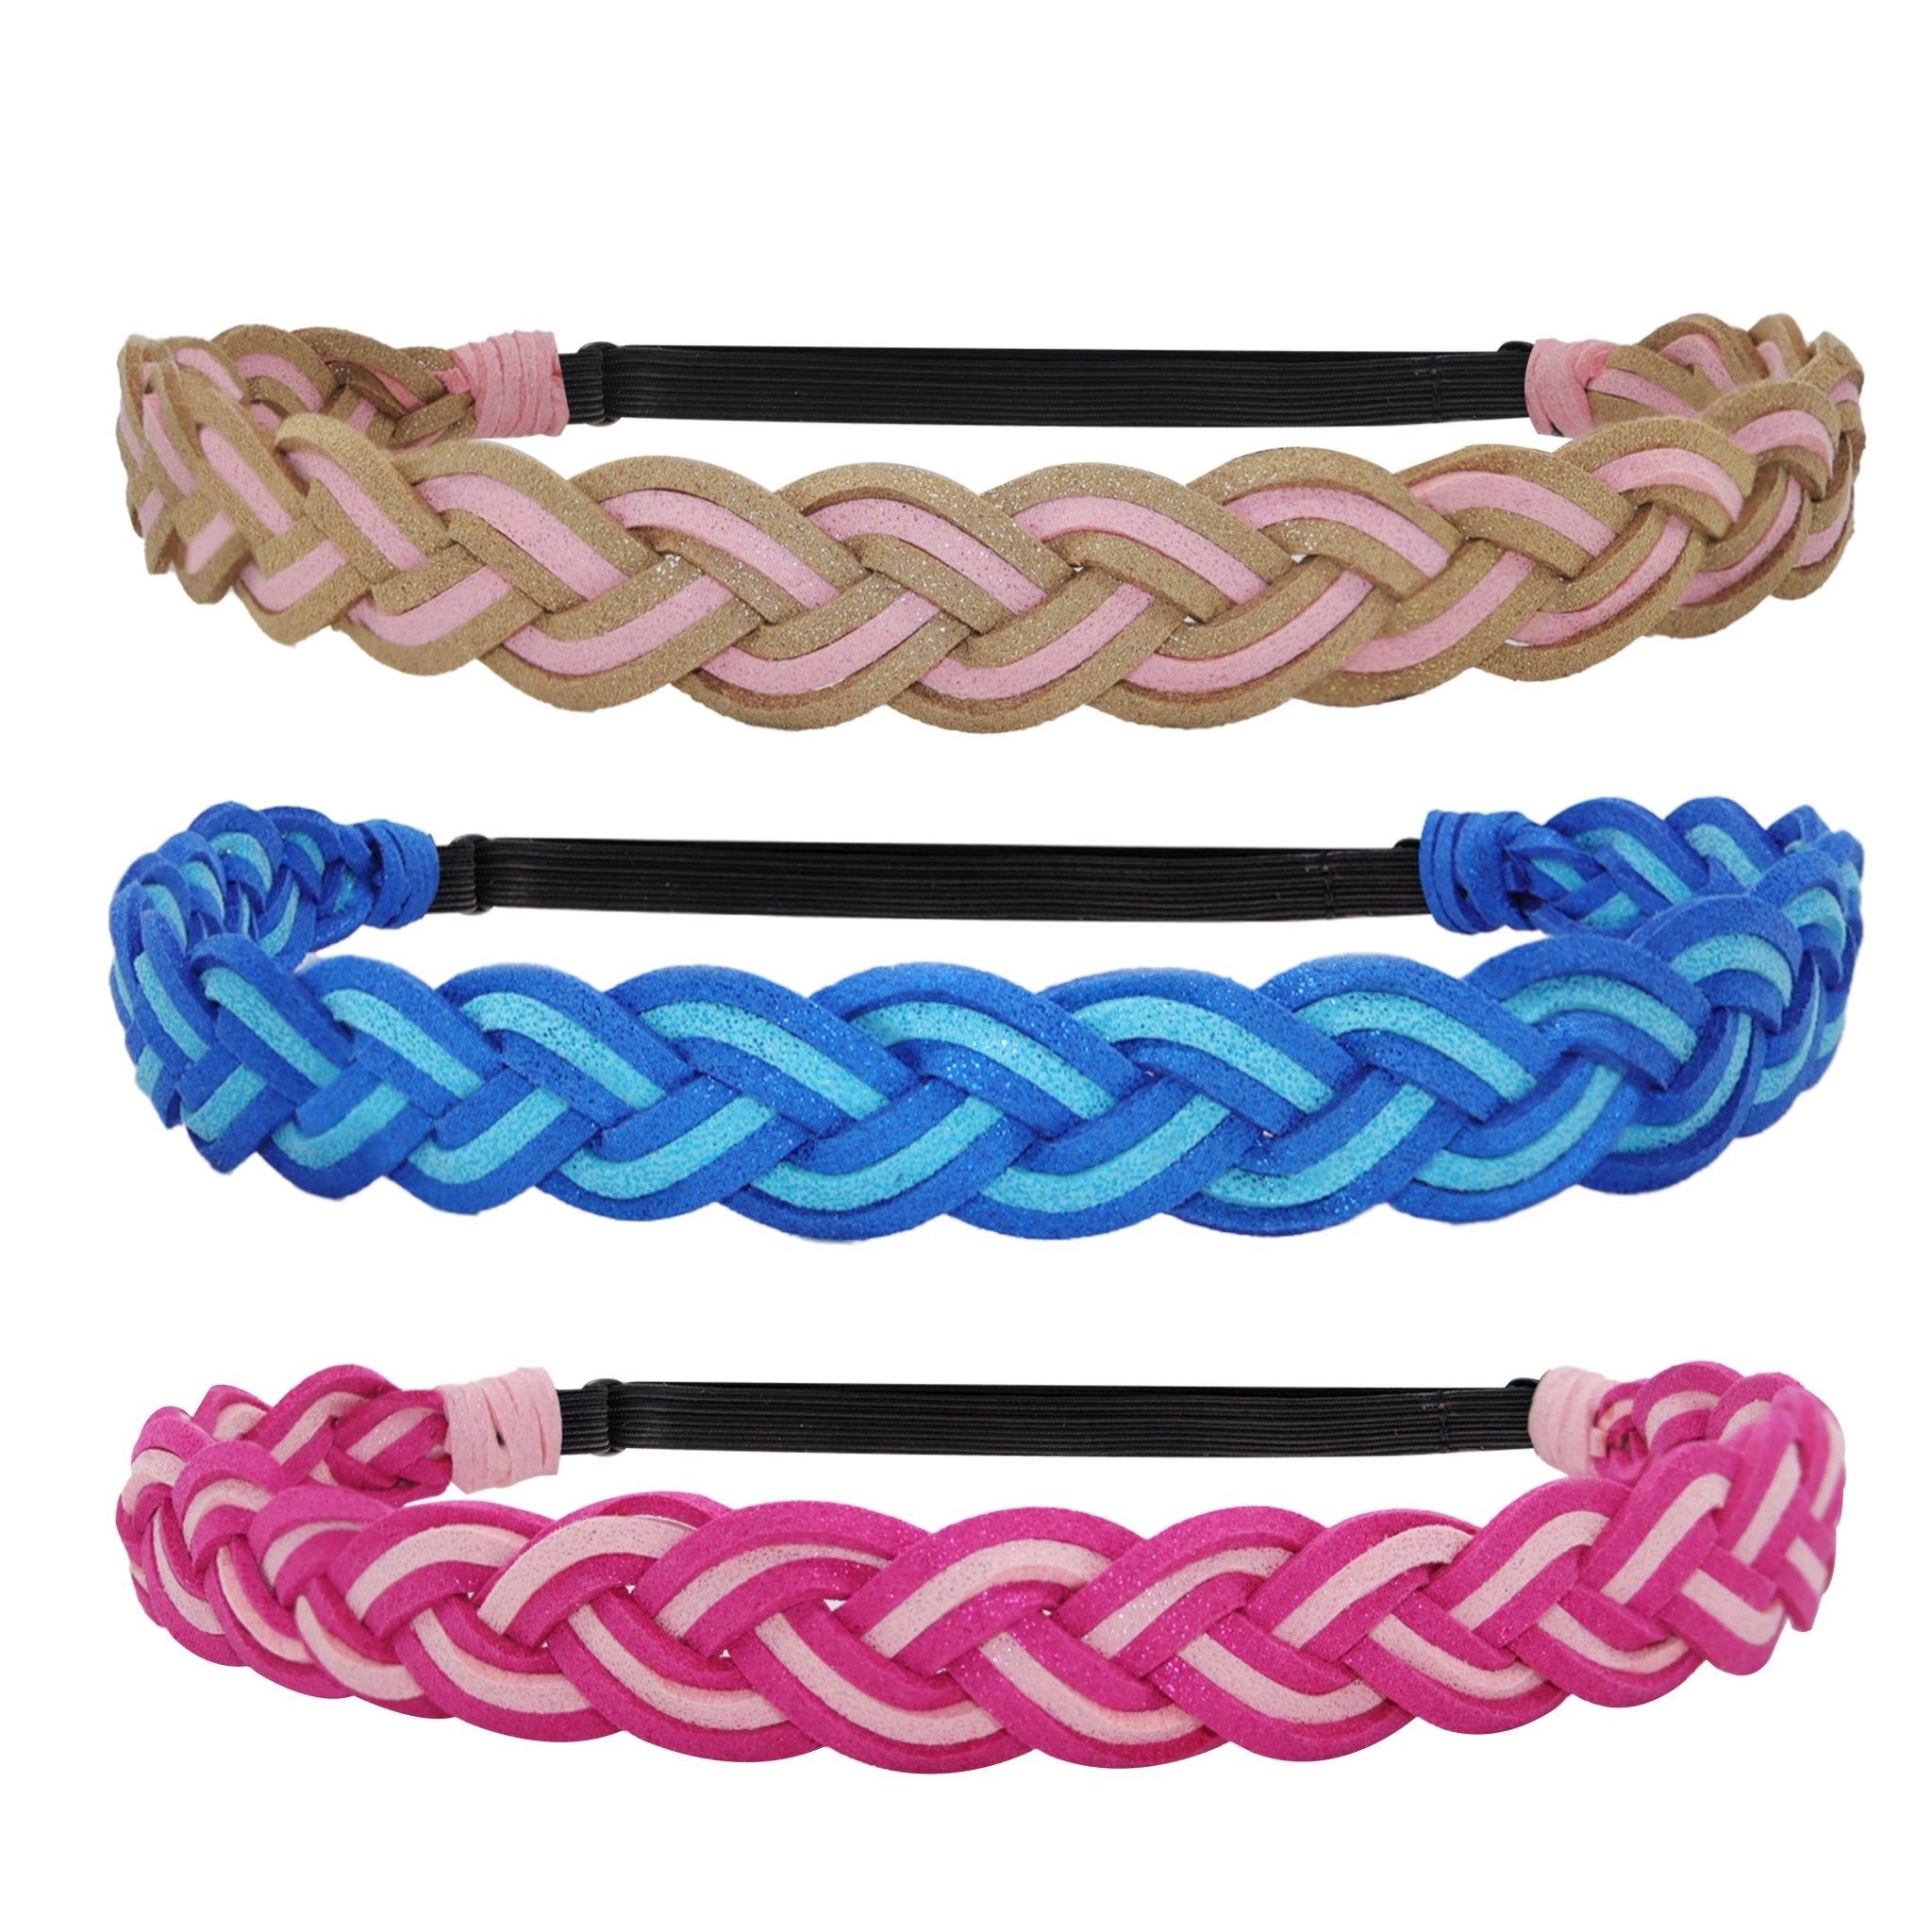 Adjustable Two Tone Braided Headbands - 3 Pack - FROG SAC